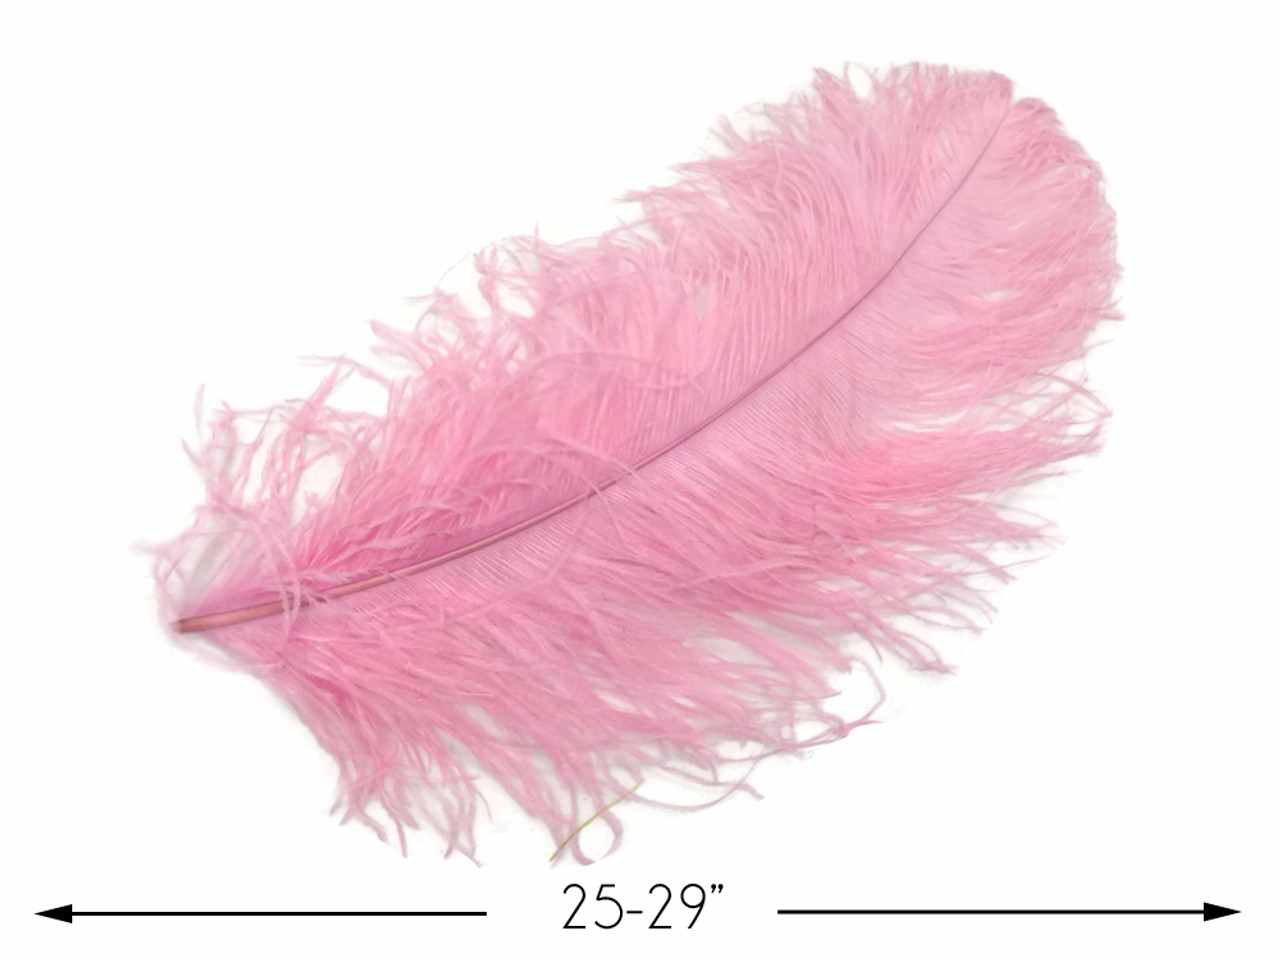 Large Pink Fluffy Feathers